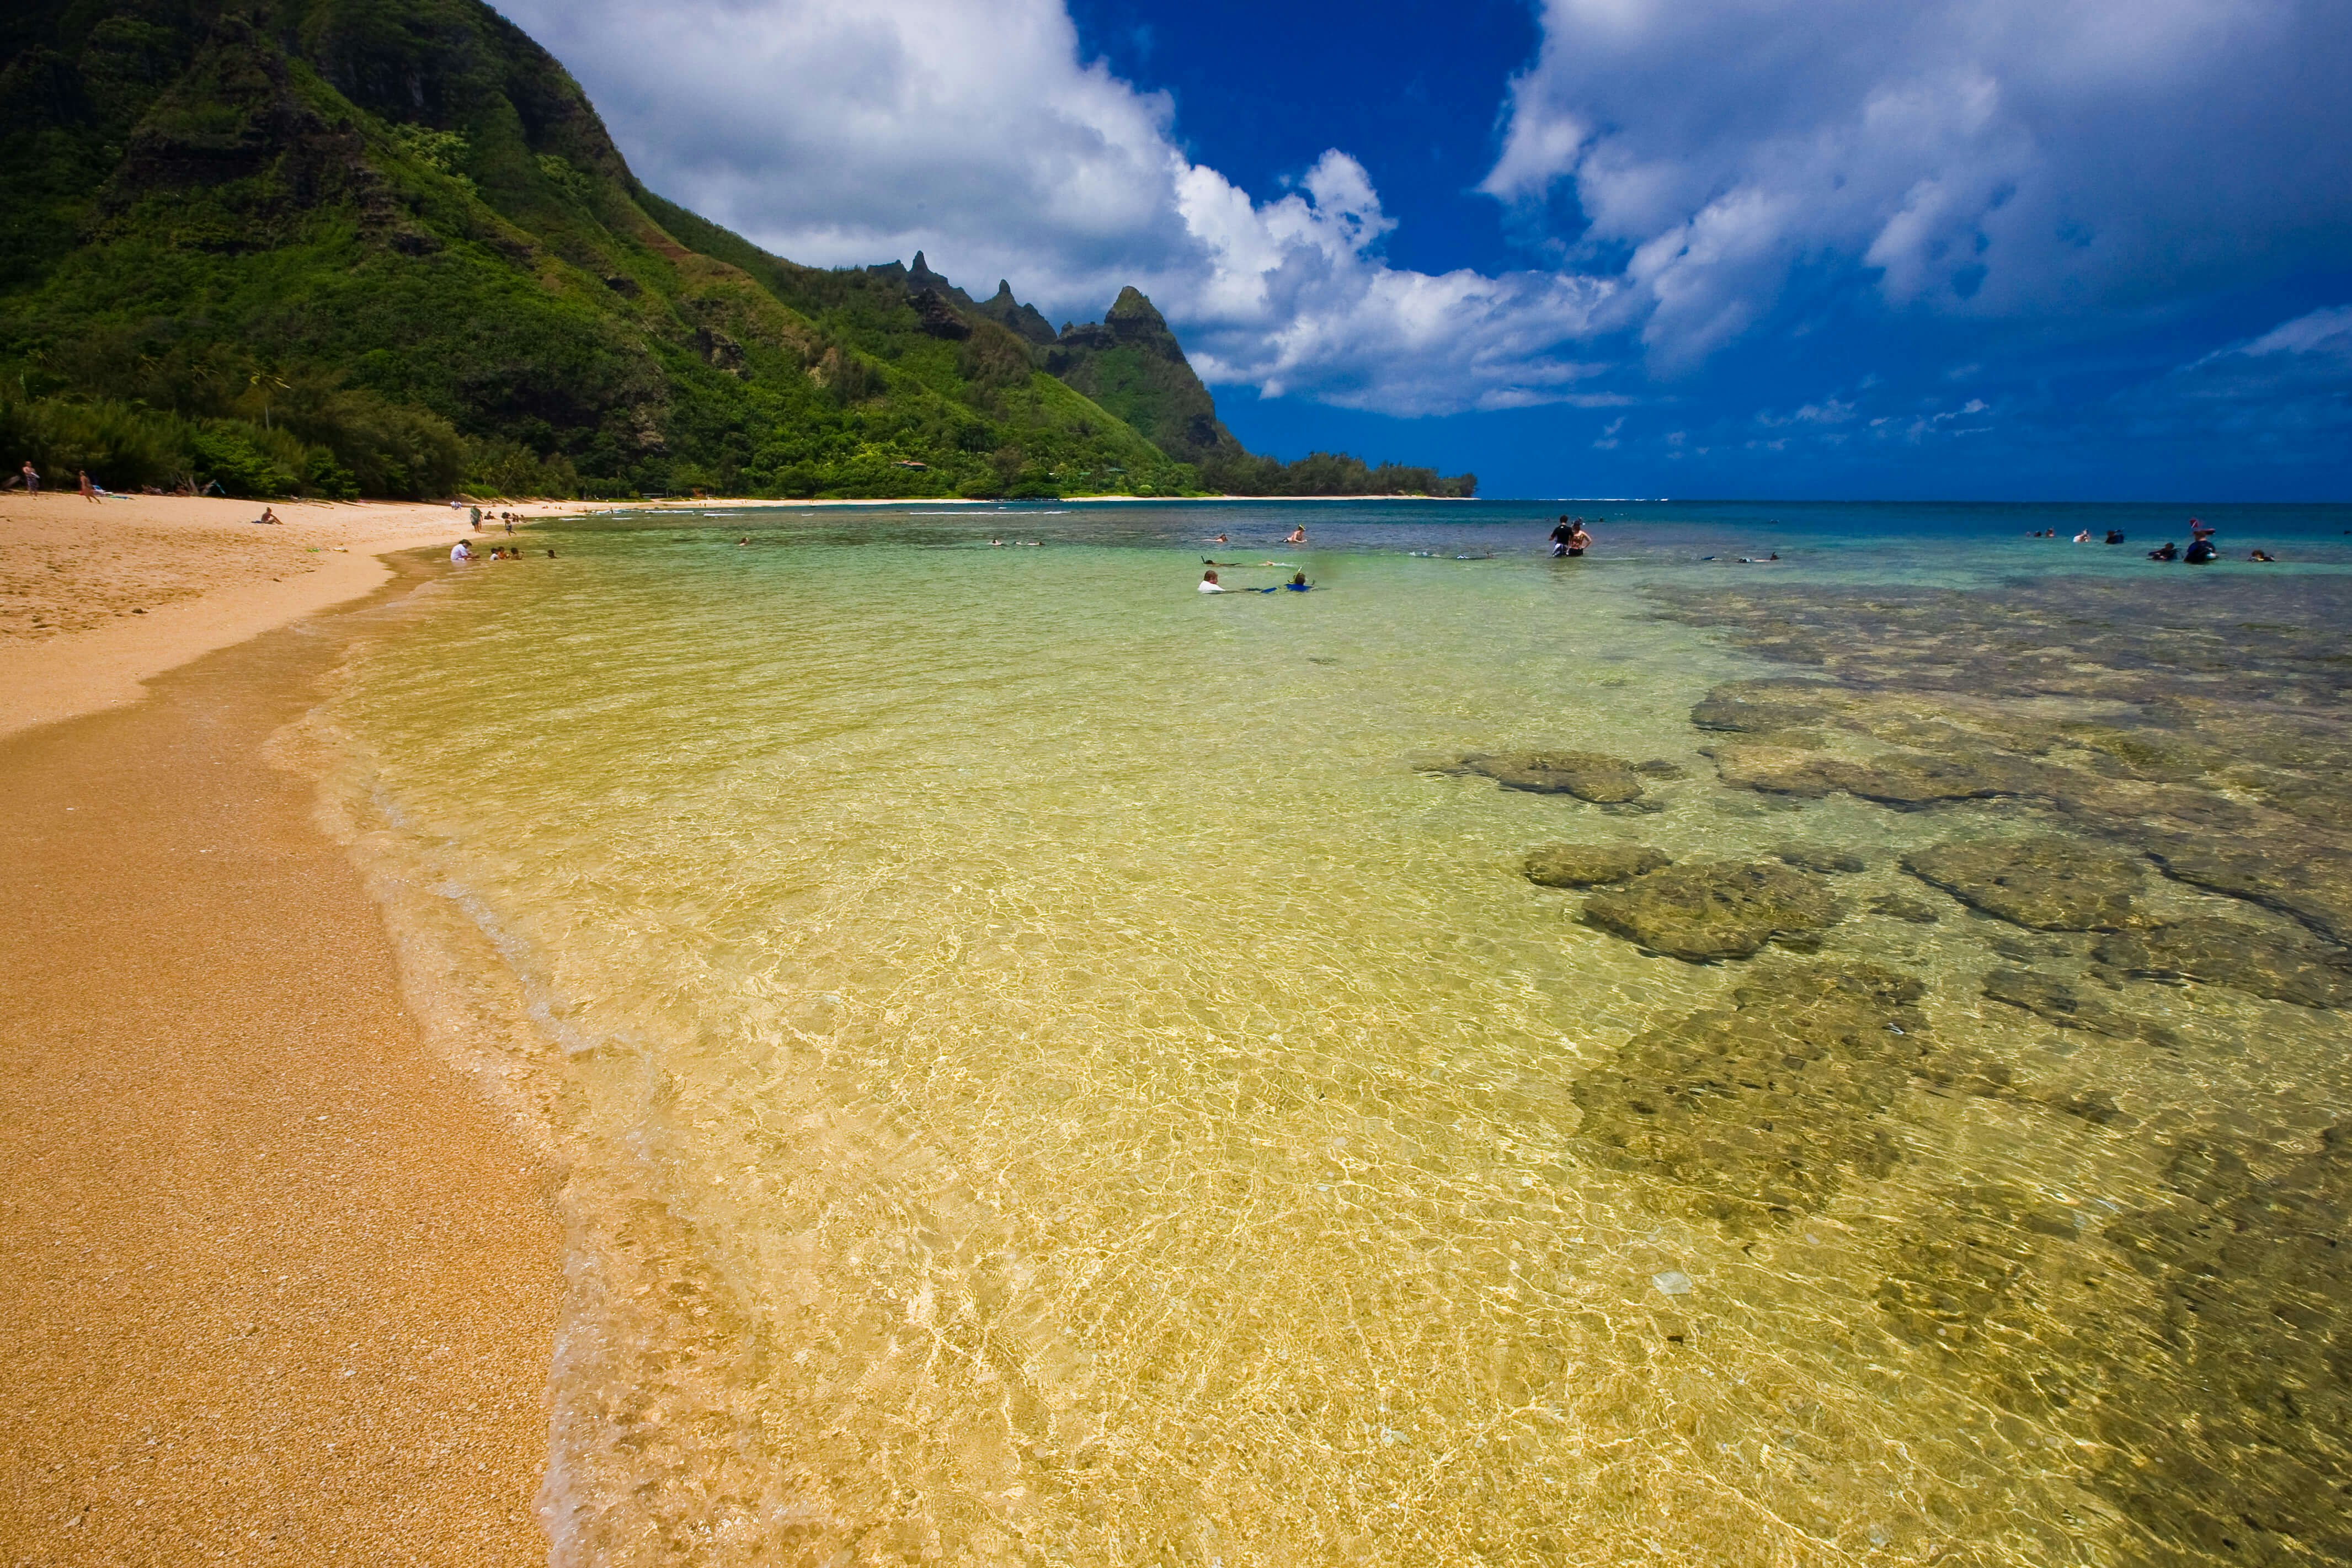 People in the water at Tunnels beach in Kauai, with a view of Makana peak (aka Bali Hai) in the distance